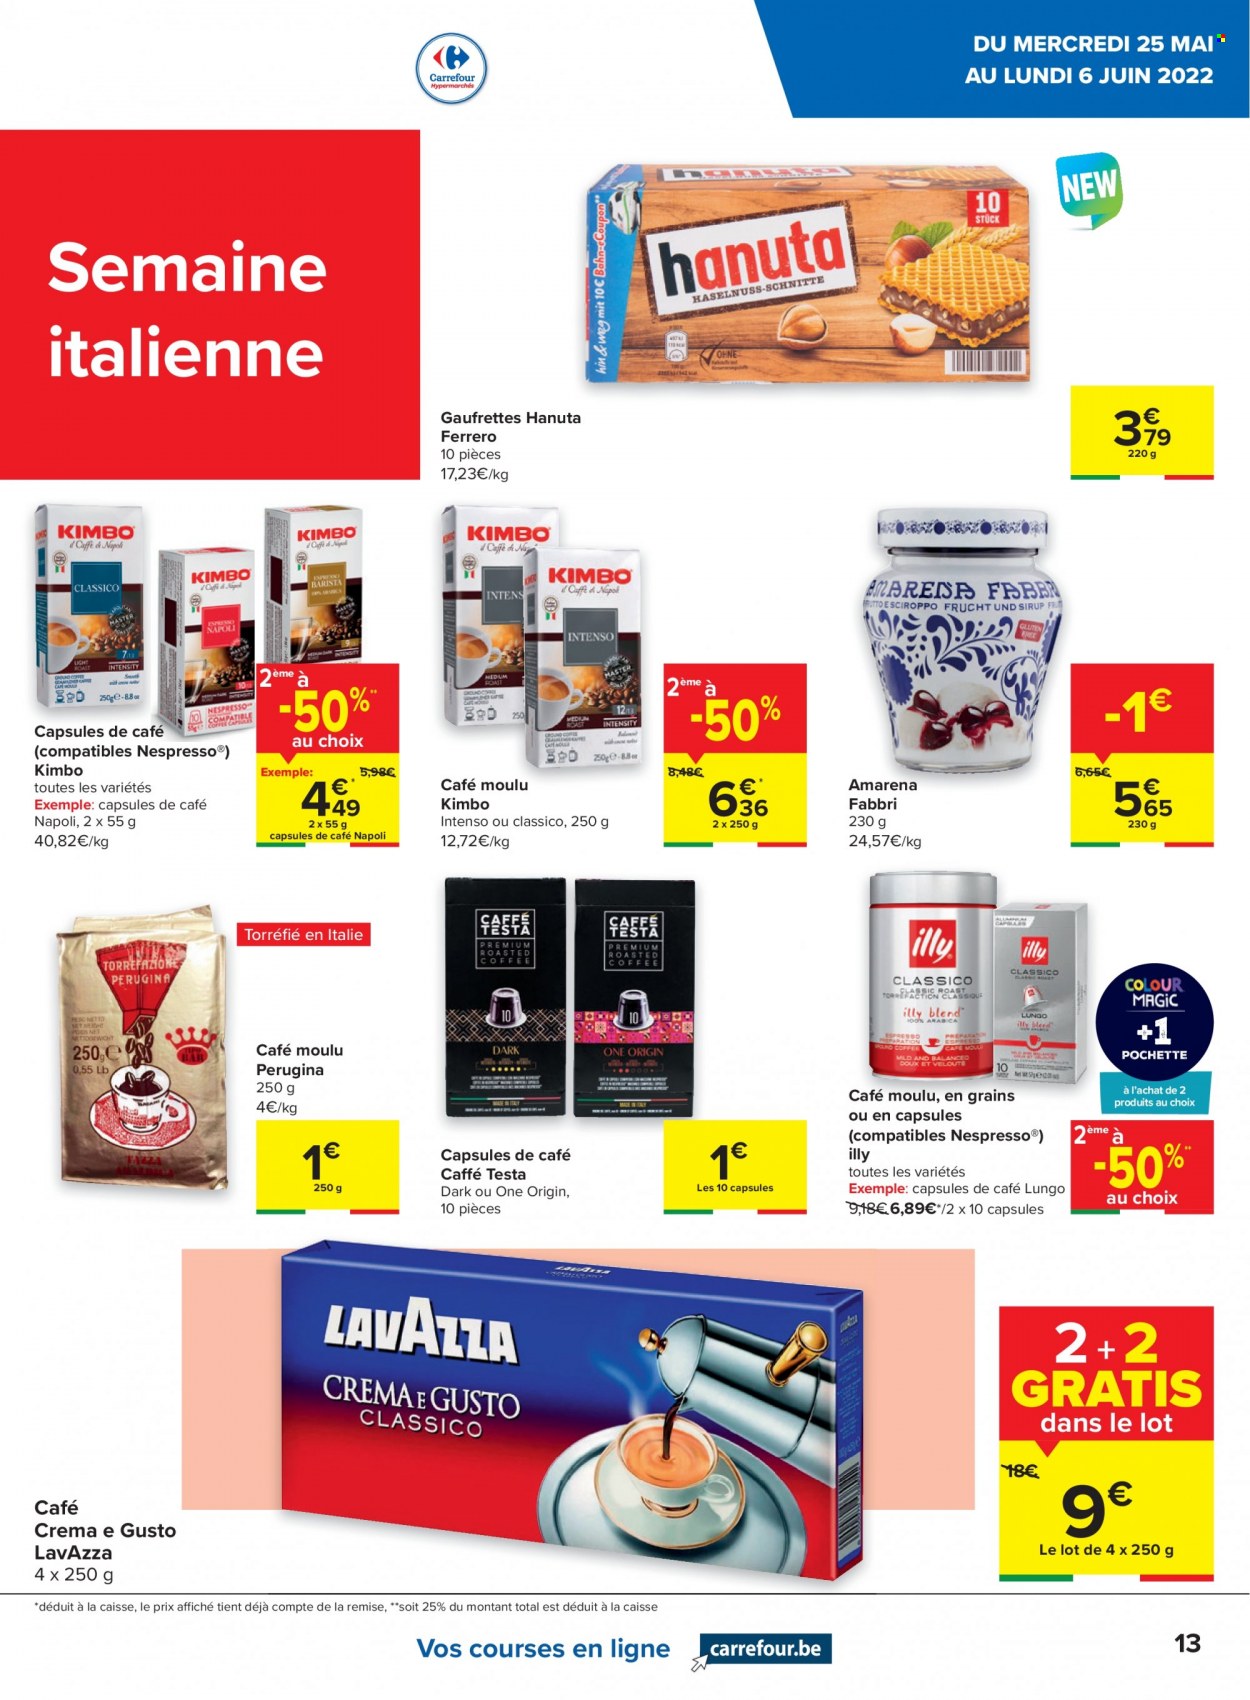 Catalogue Carrefour hypermarkt - 25.5.2022 - 31.5.2022. Page 13.